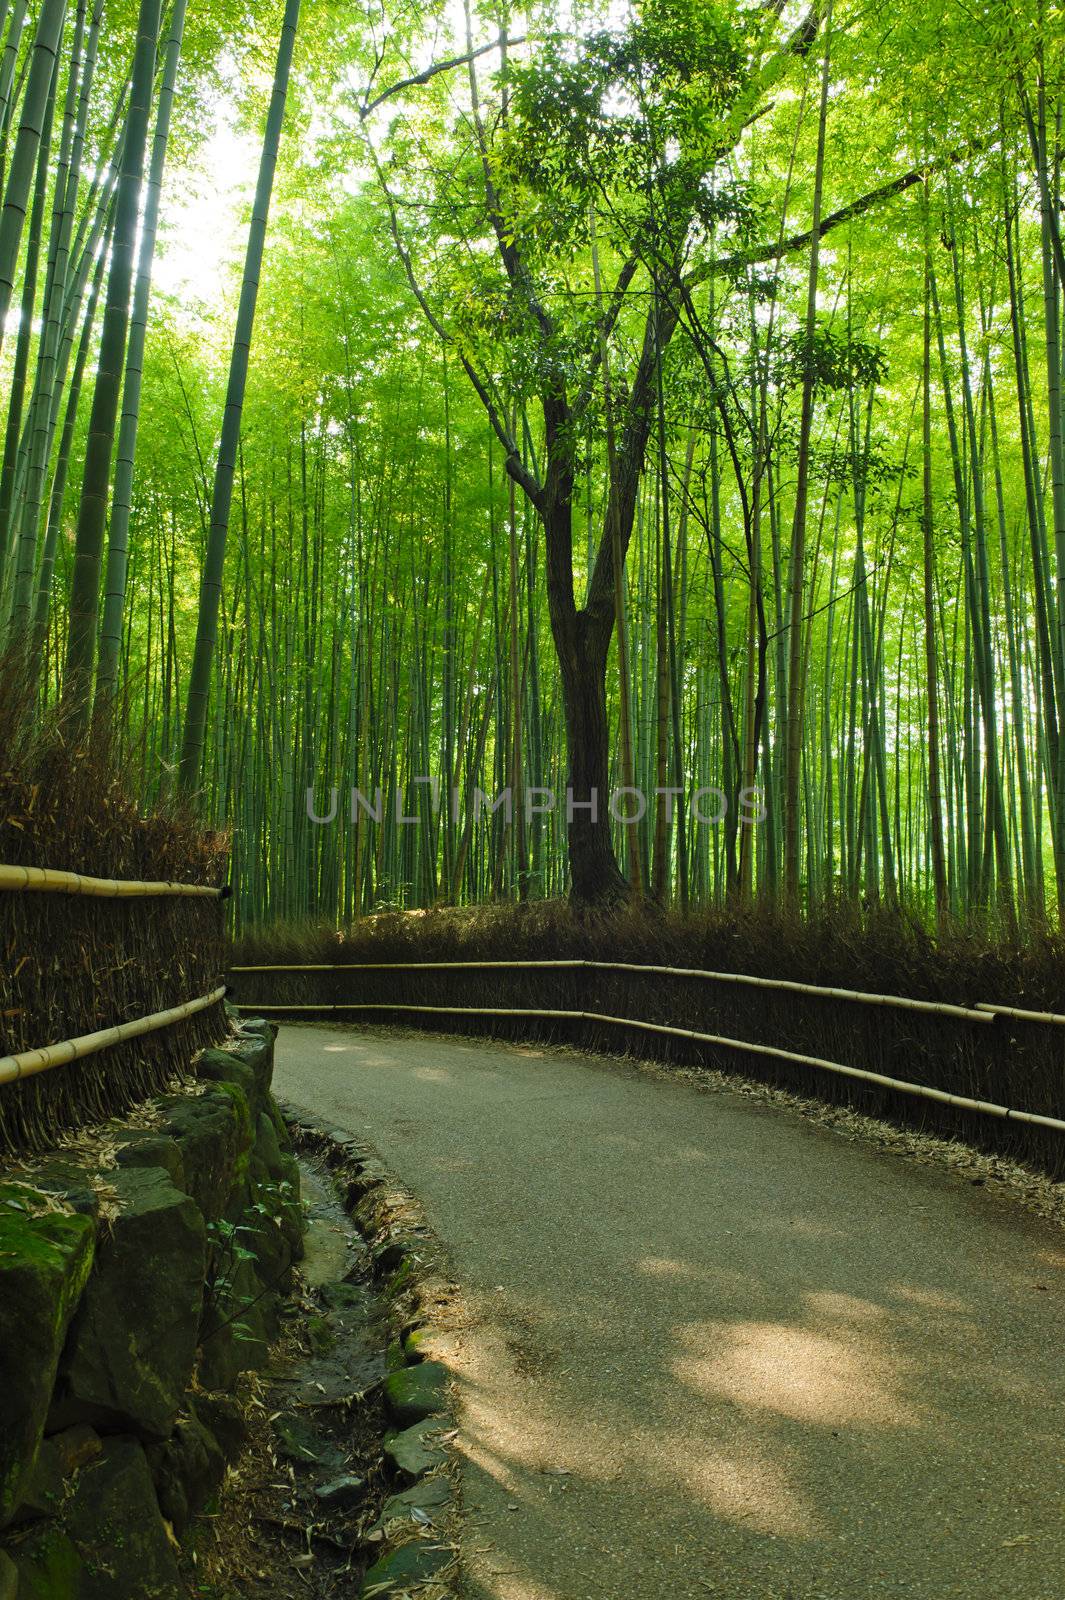 Bamboo grove by fyletto